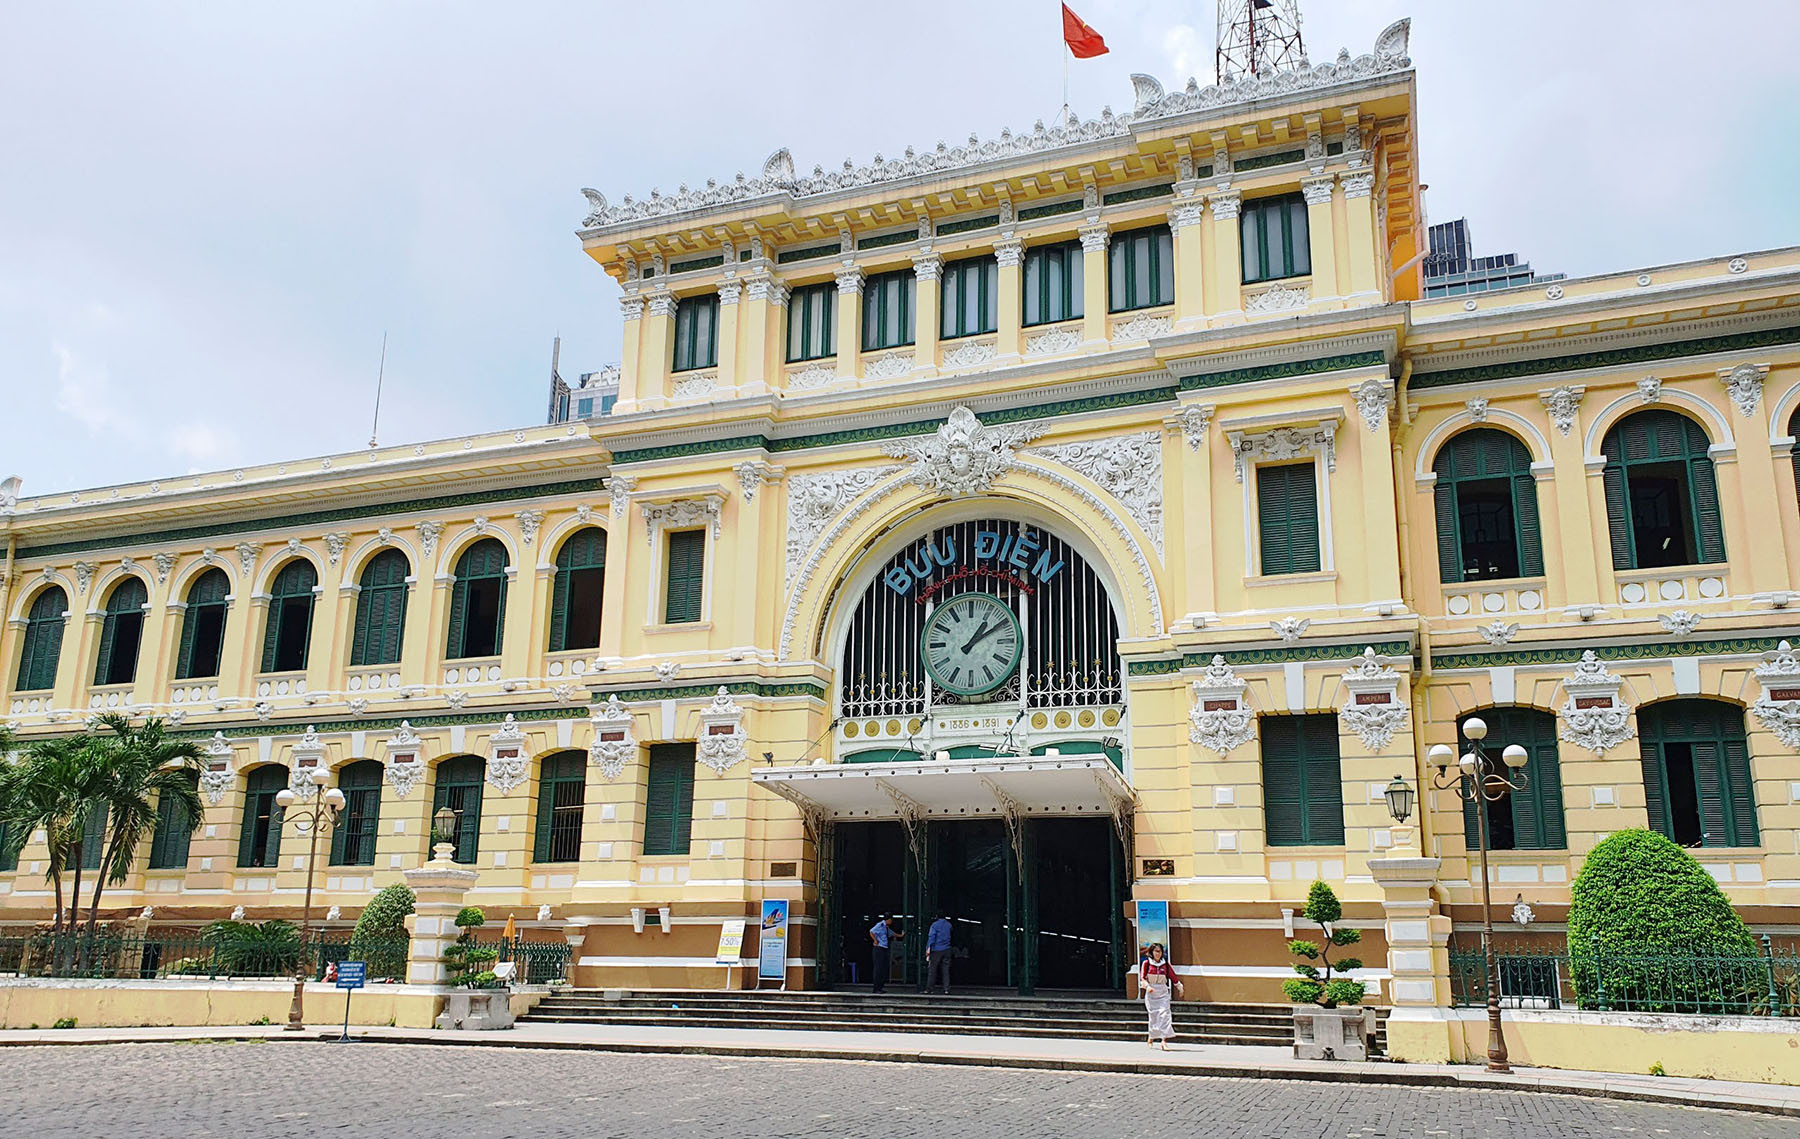 Ho Chi Minh City Post Office - one of the tourist destinations in Ho Chi Minh City